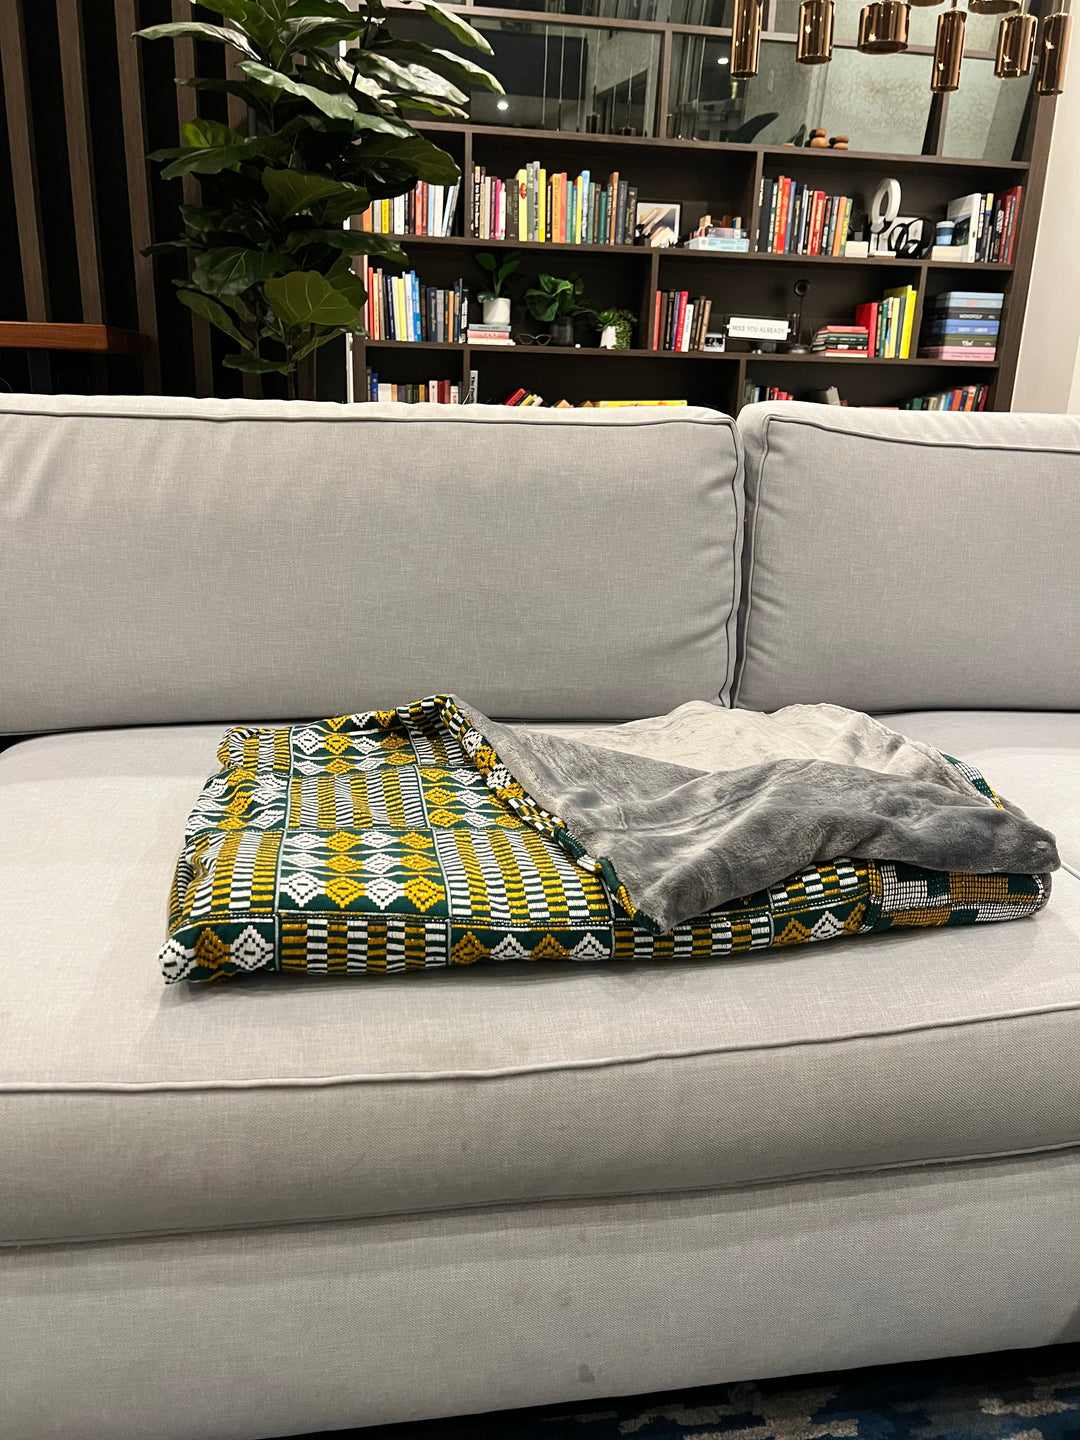 Traditional Kente cloth blanket, perfect for elevating Kente patterned bed linens and cultural Kente accessories in your living space from Obrempong Home